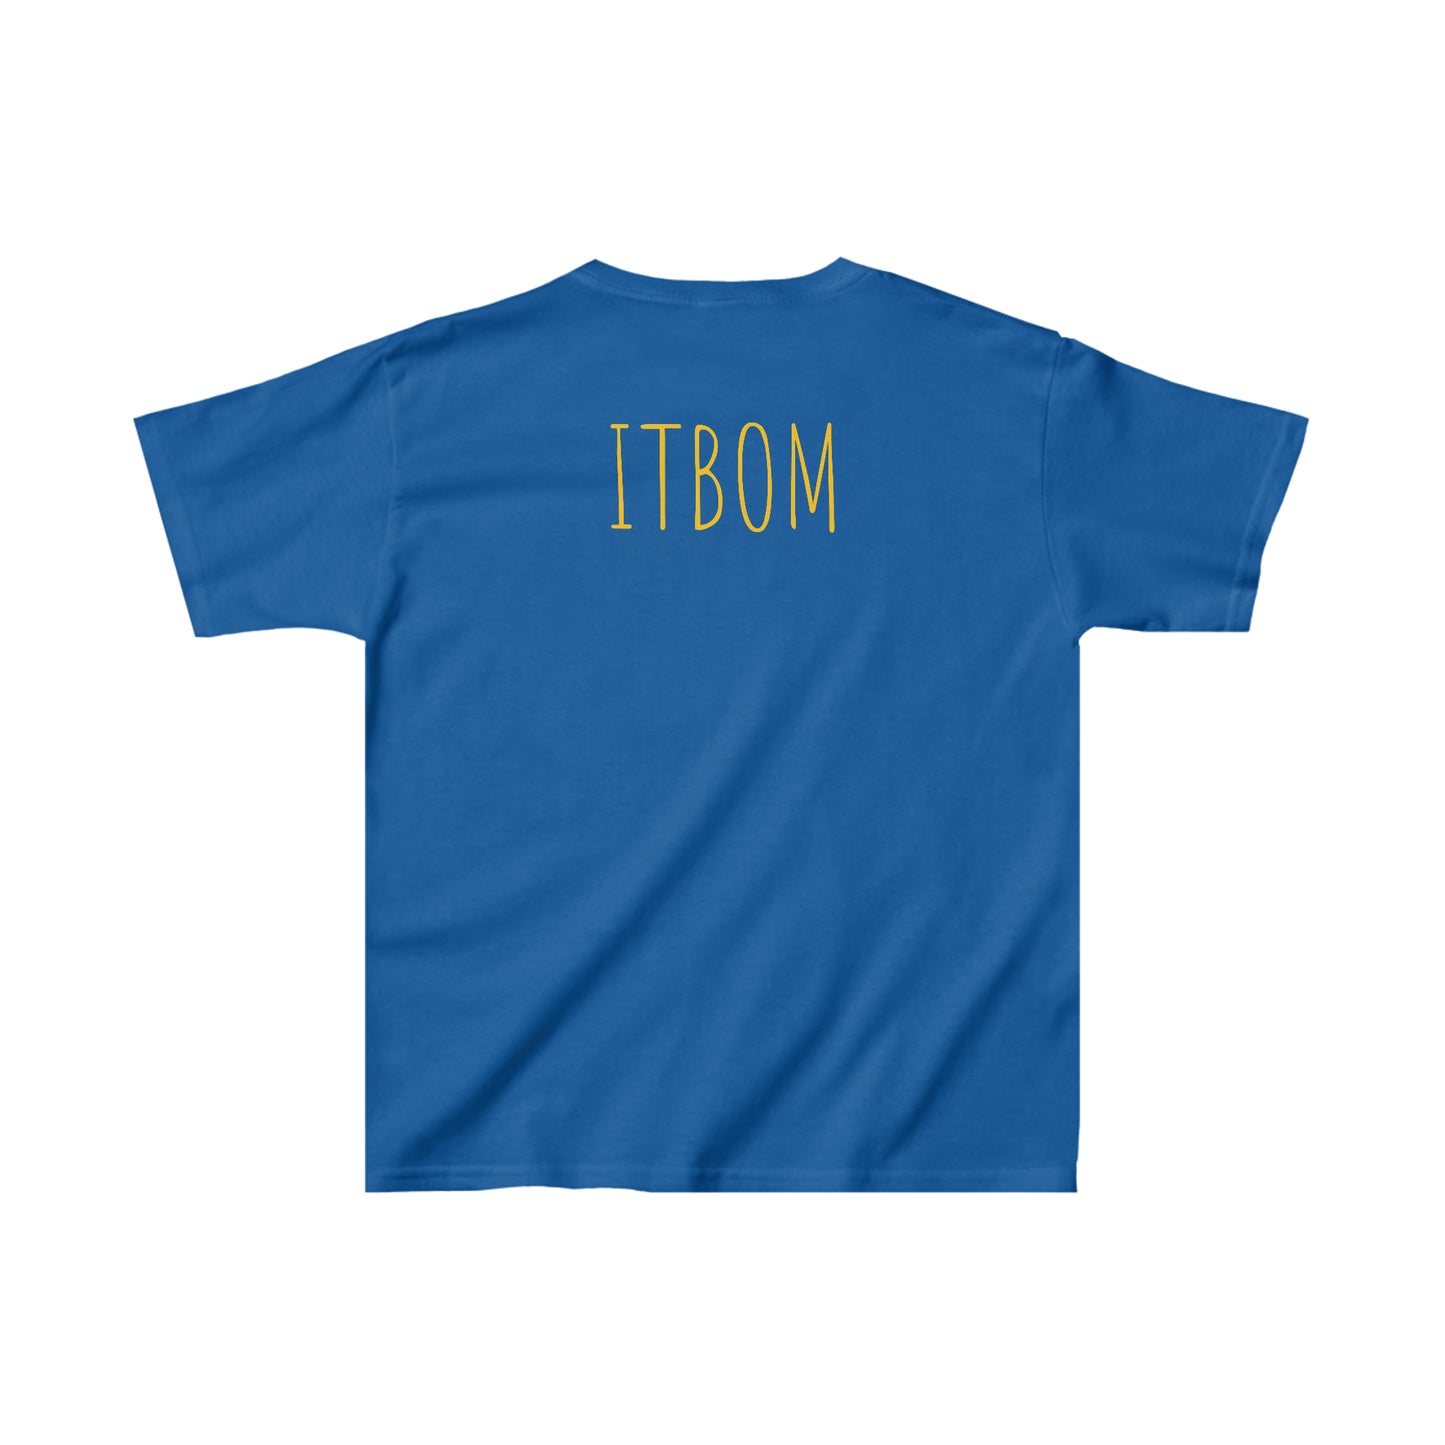 ITBOM I Can Sing - Whale Song Boss Big Kids Regular Fit Heavy Cotton Short Sleeve Tee XS-XL in 7 different Boss-Some colors